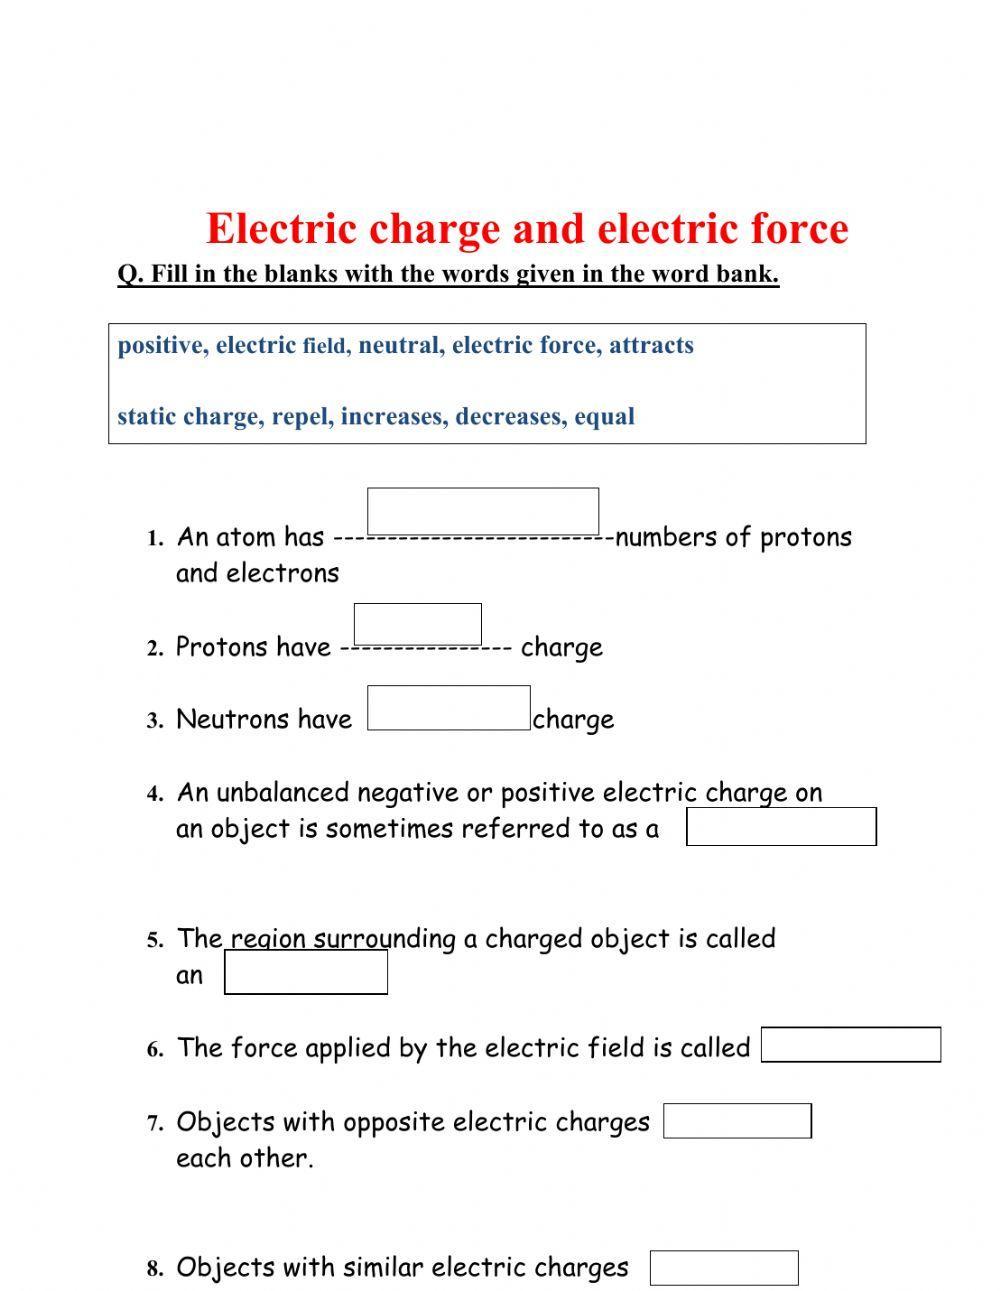 Electric charge